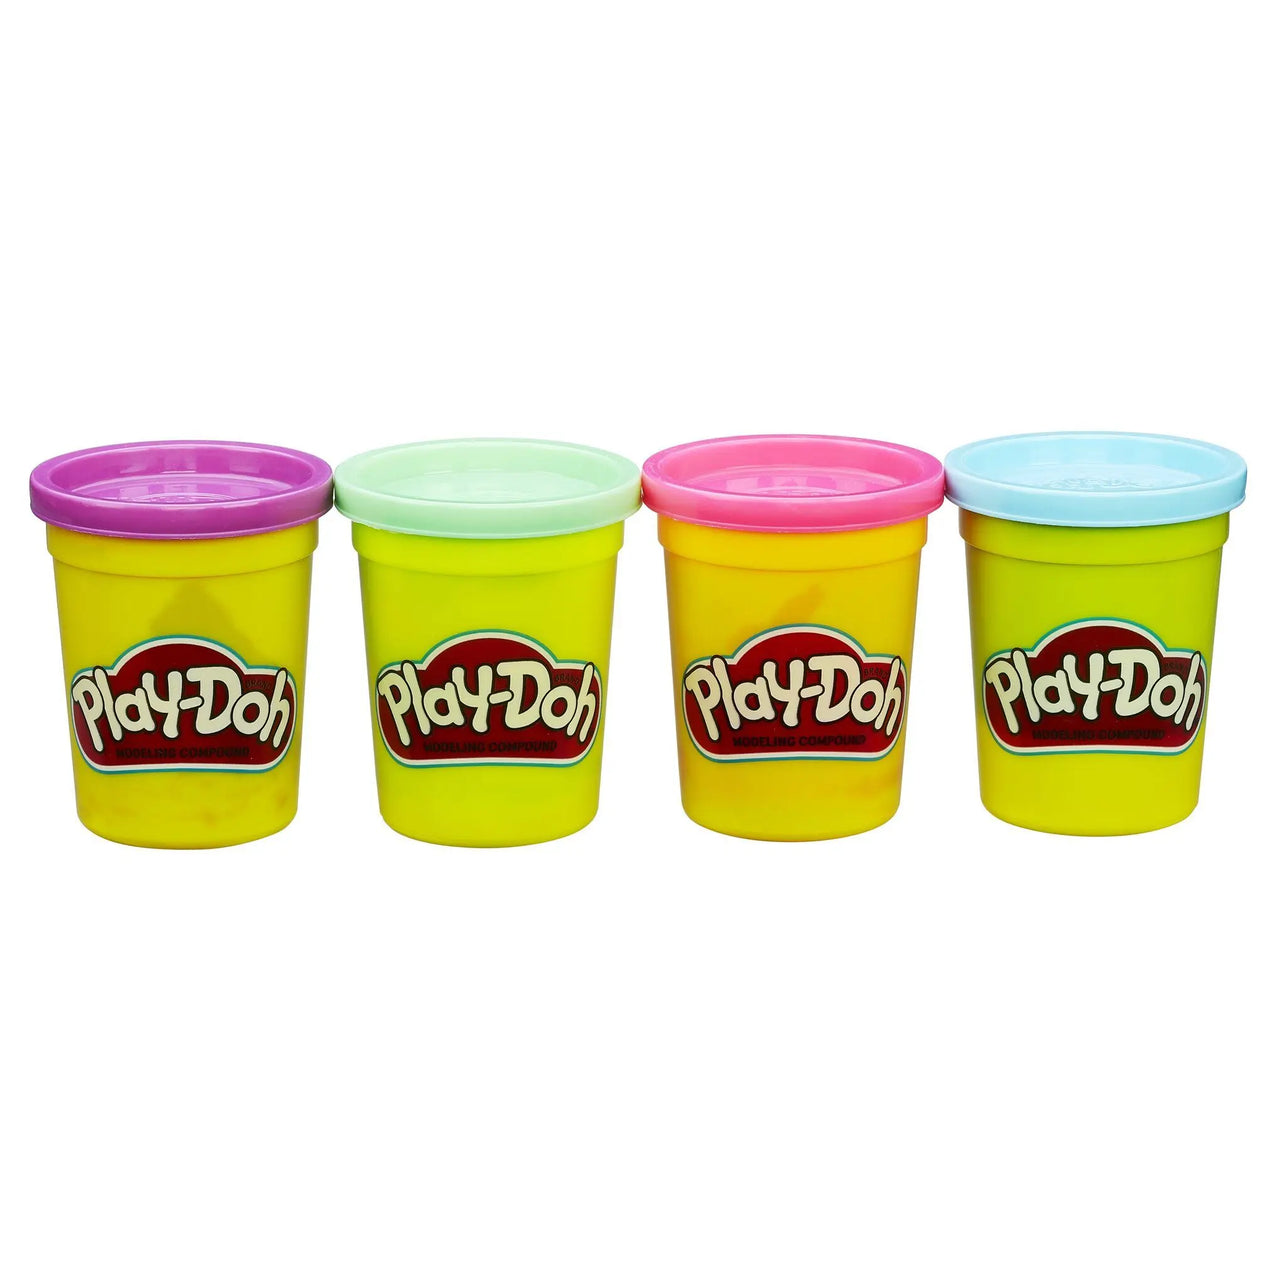 Play-Doh 4-Pack Assortment Play-Doh